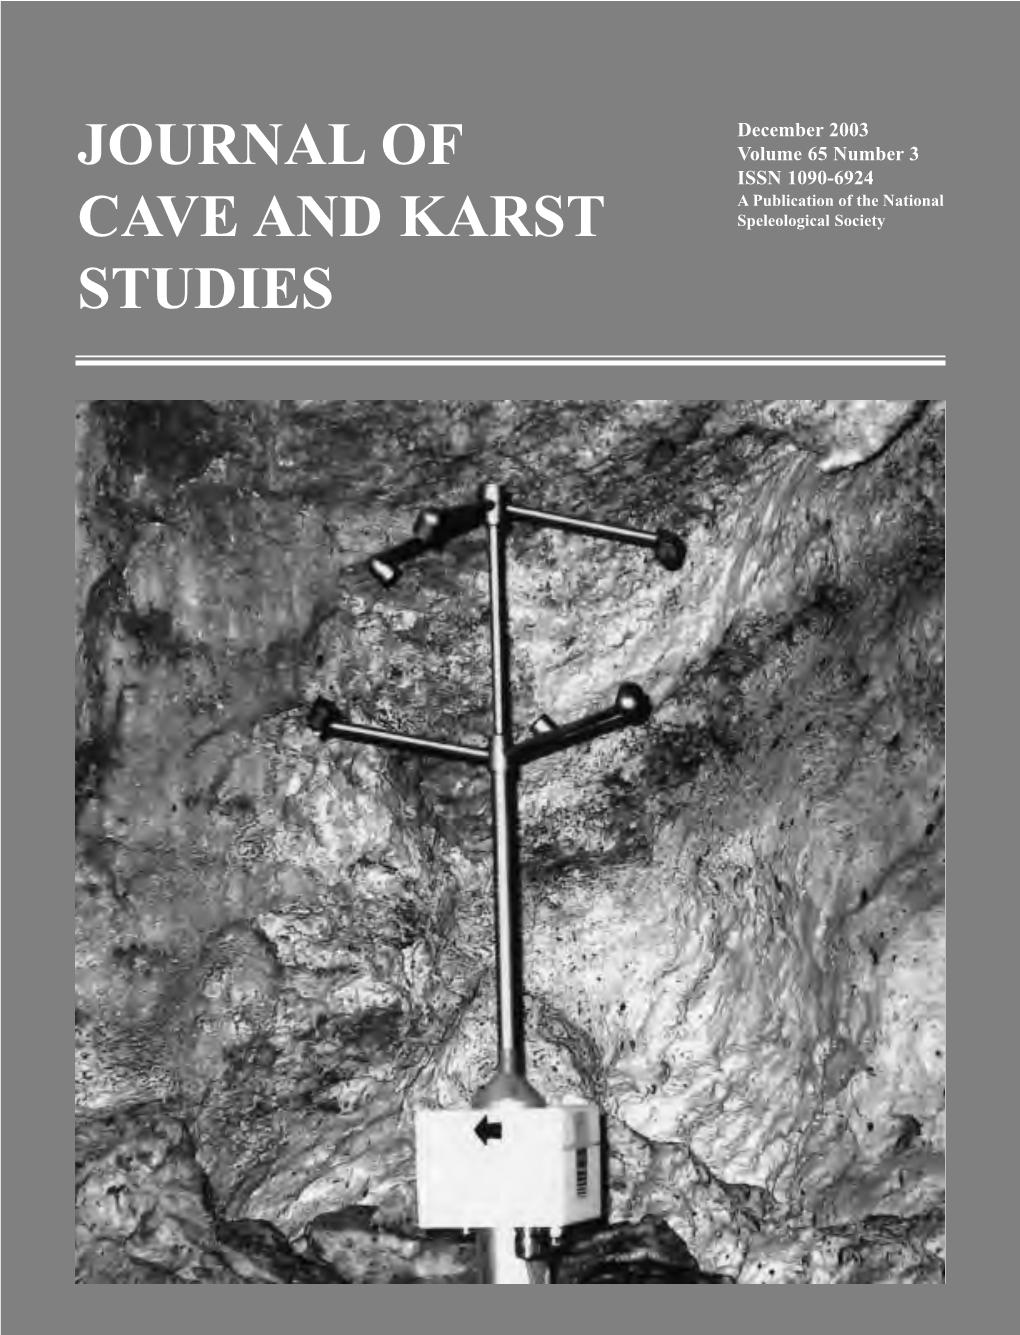 Journal of Cave and Karst Studies Editor Louise D